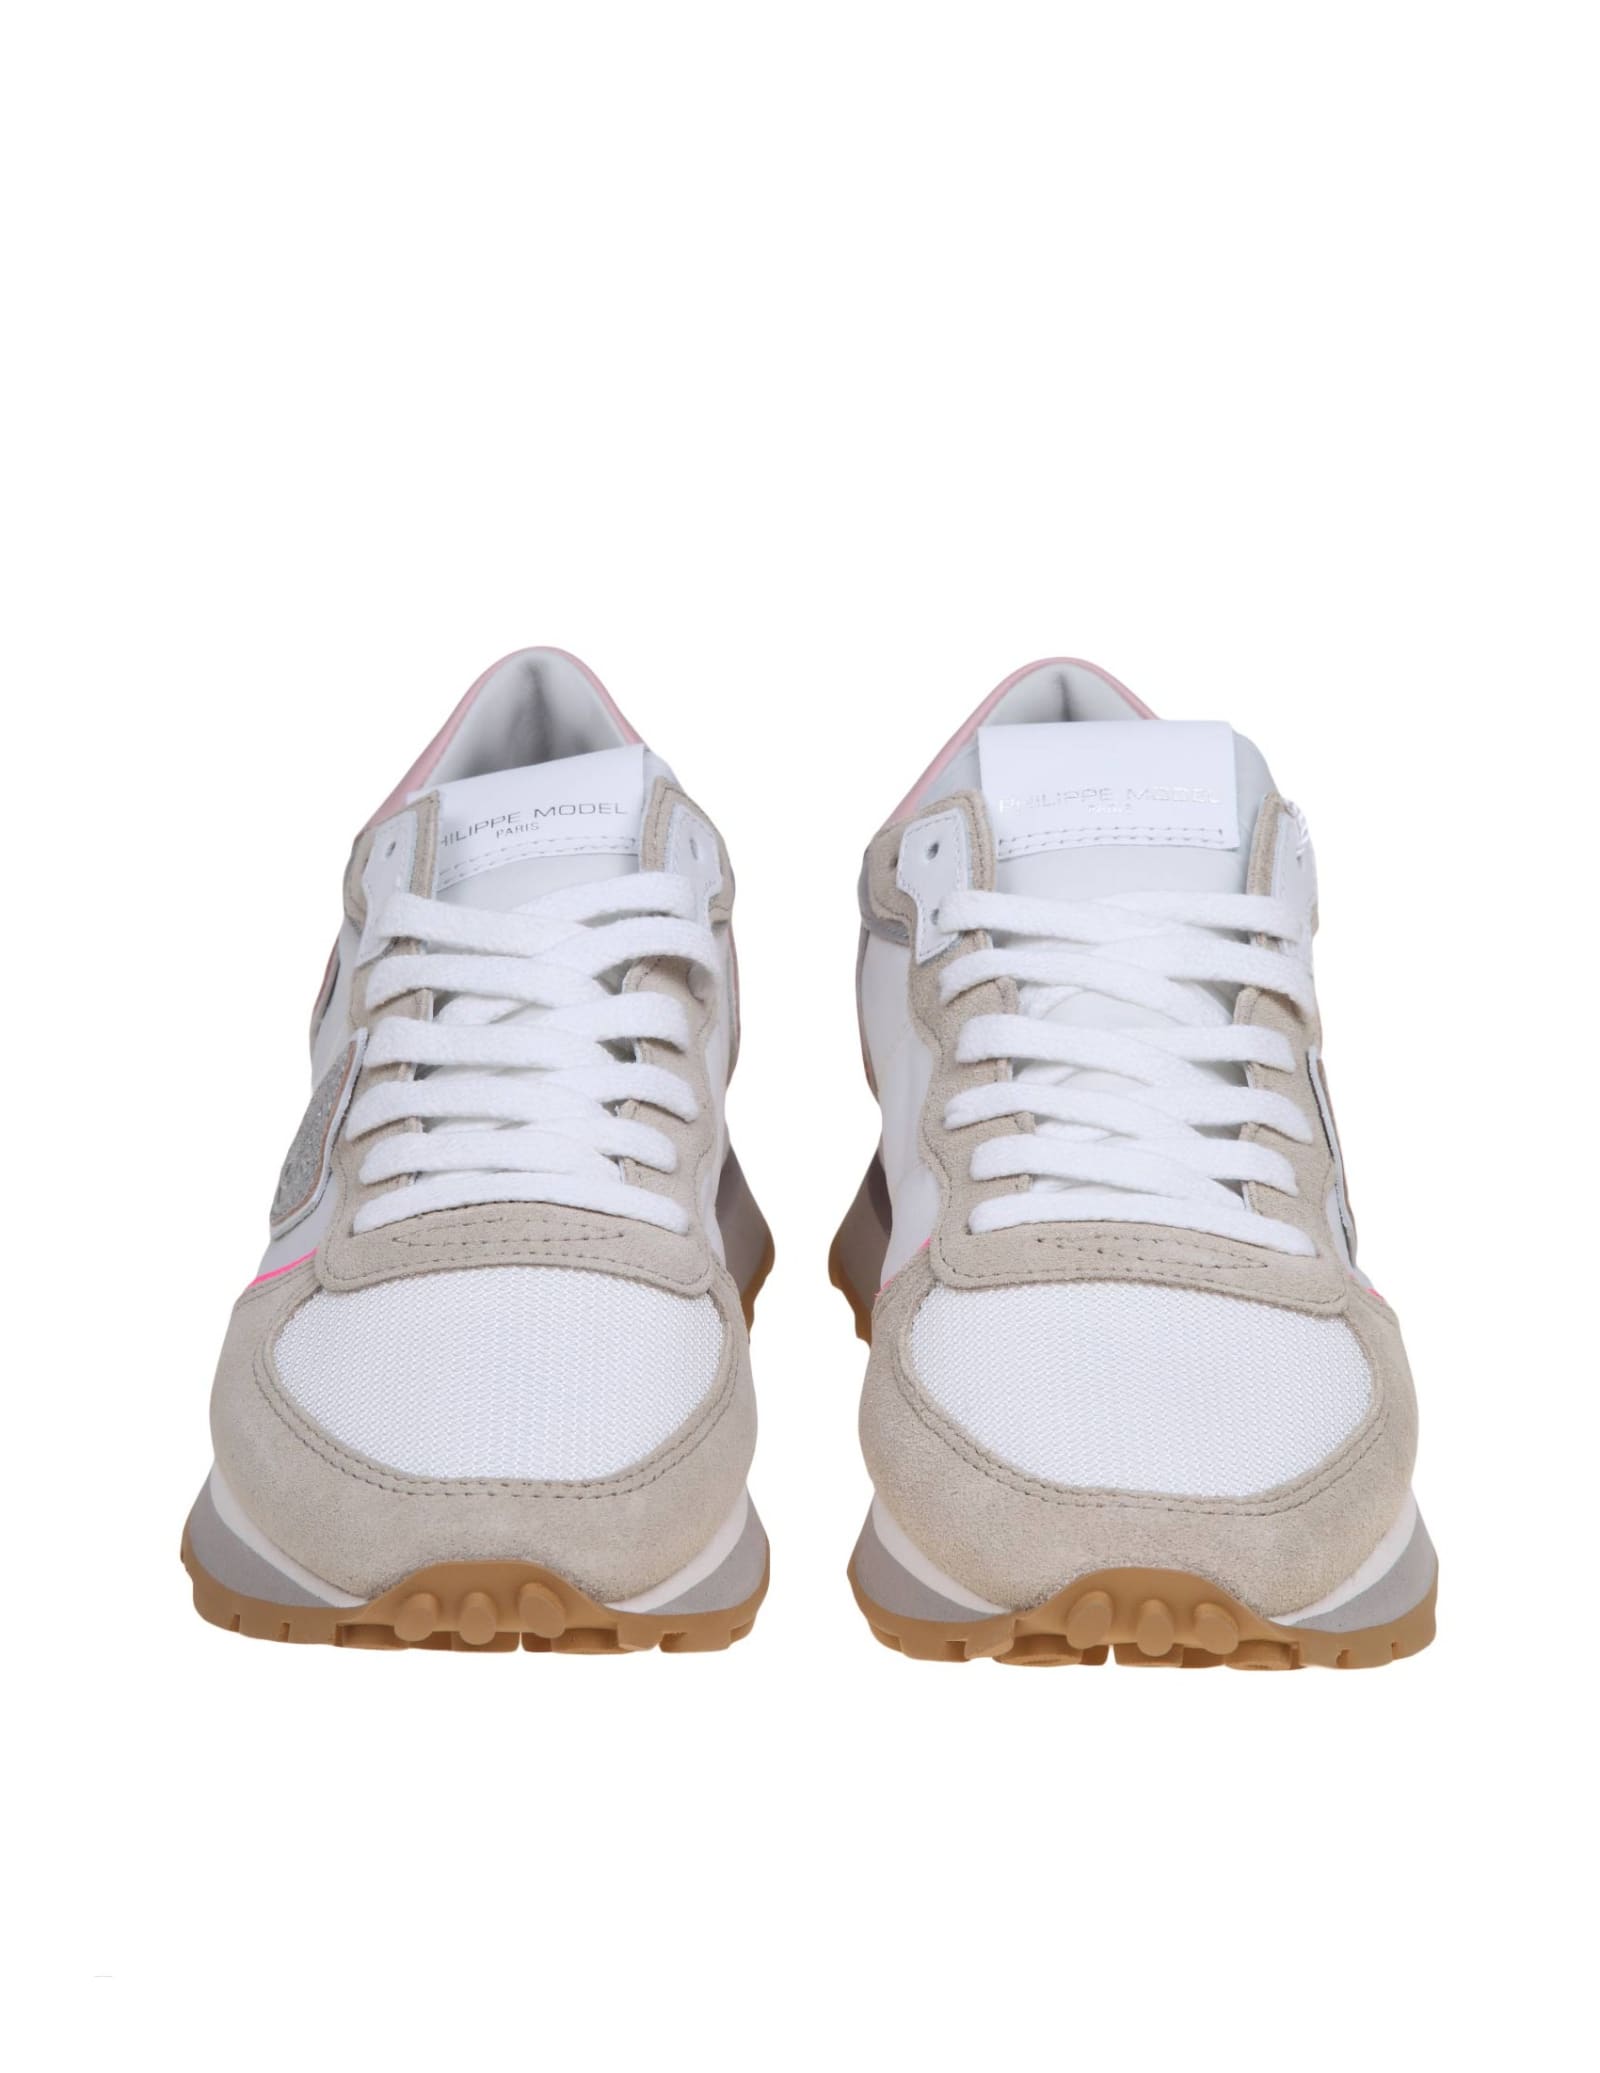 Shop Philipp Plein Philippe Model Tropez Sneakers In Suede And Nylon Color White And Pink In White/rose